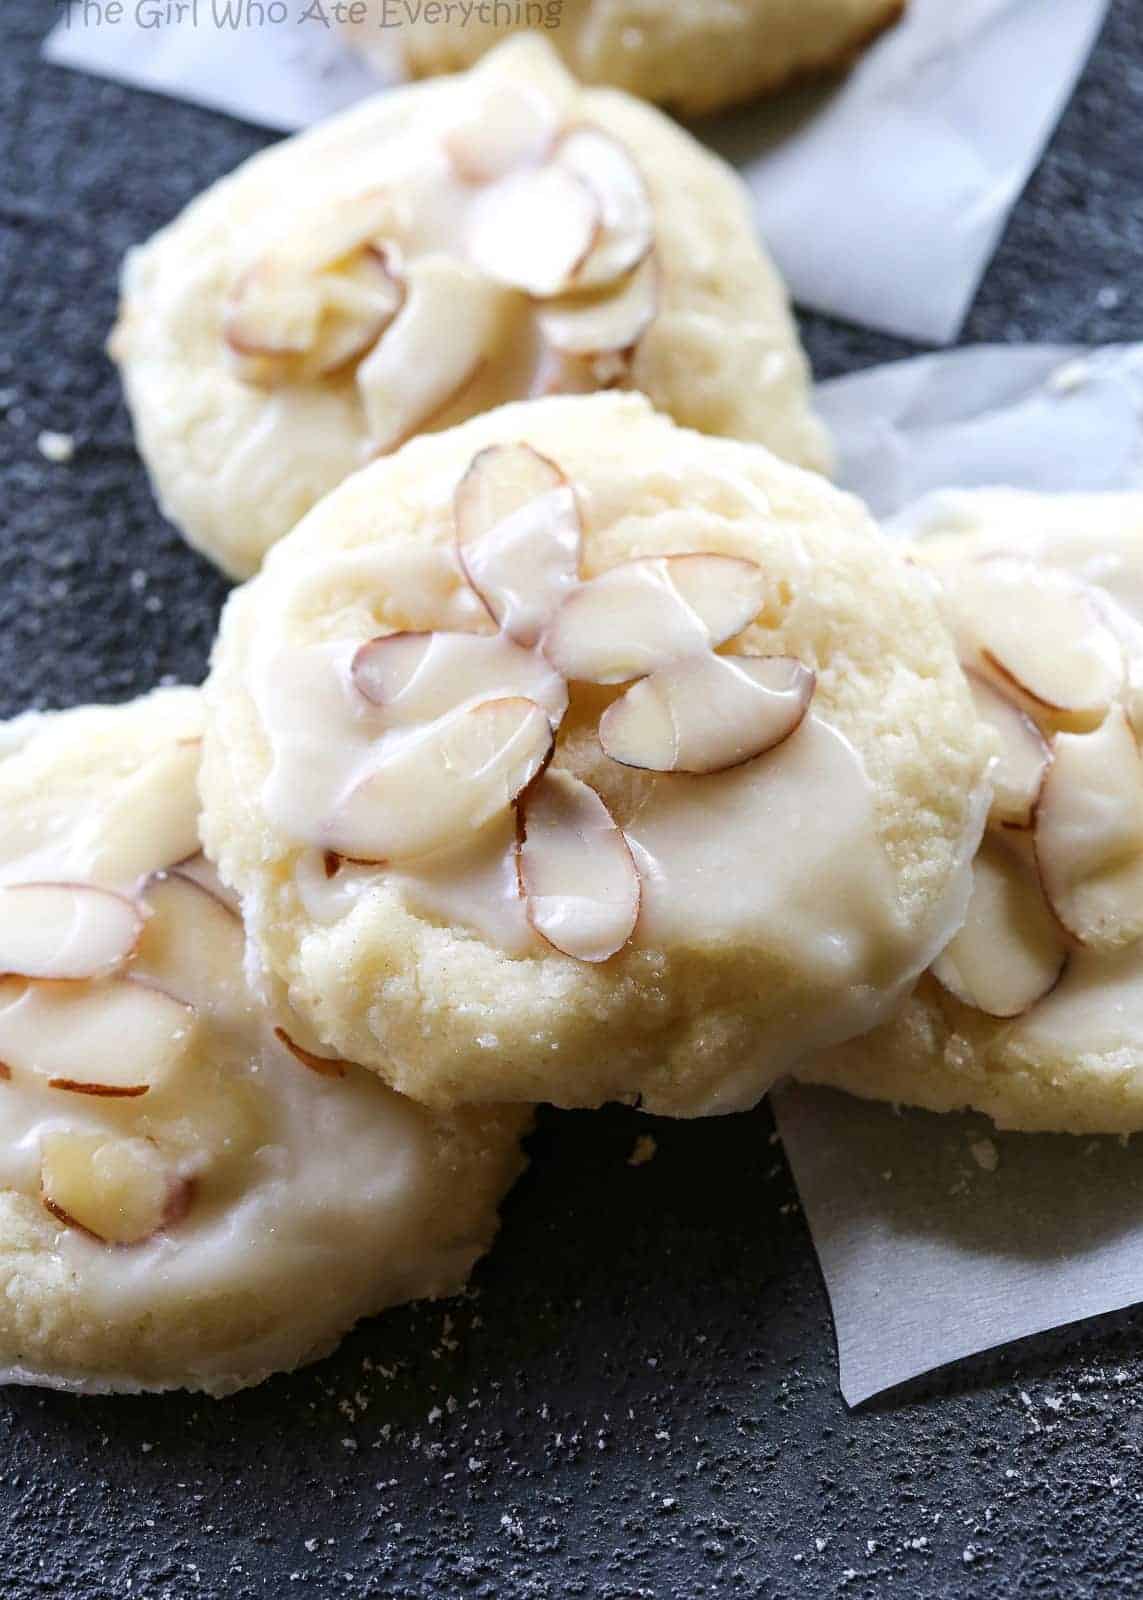 Almond Cookies - a family favorite we all love! the-girl-who-ate-everything.com